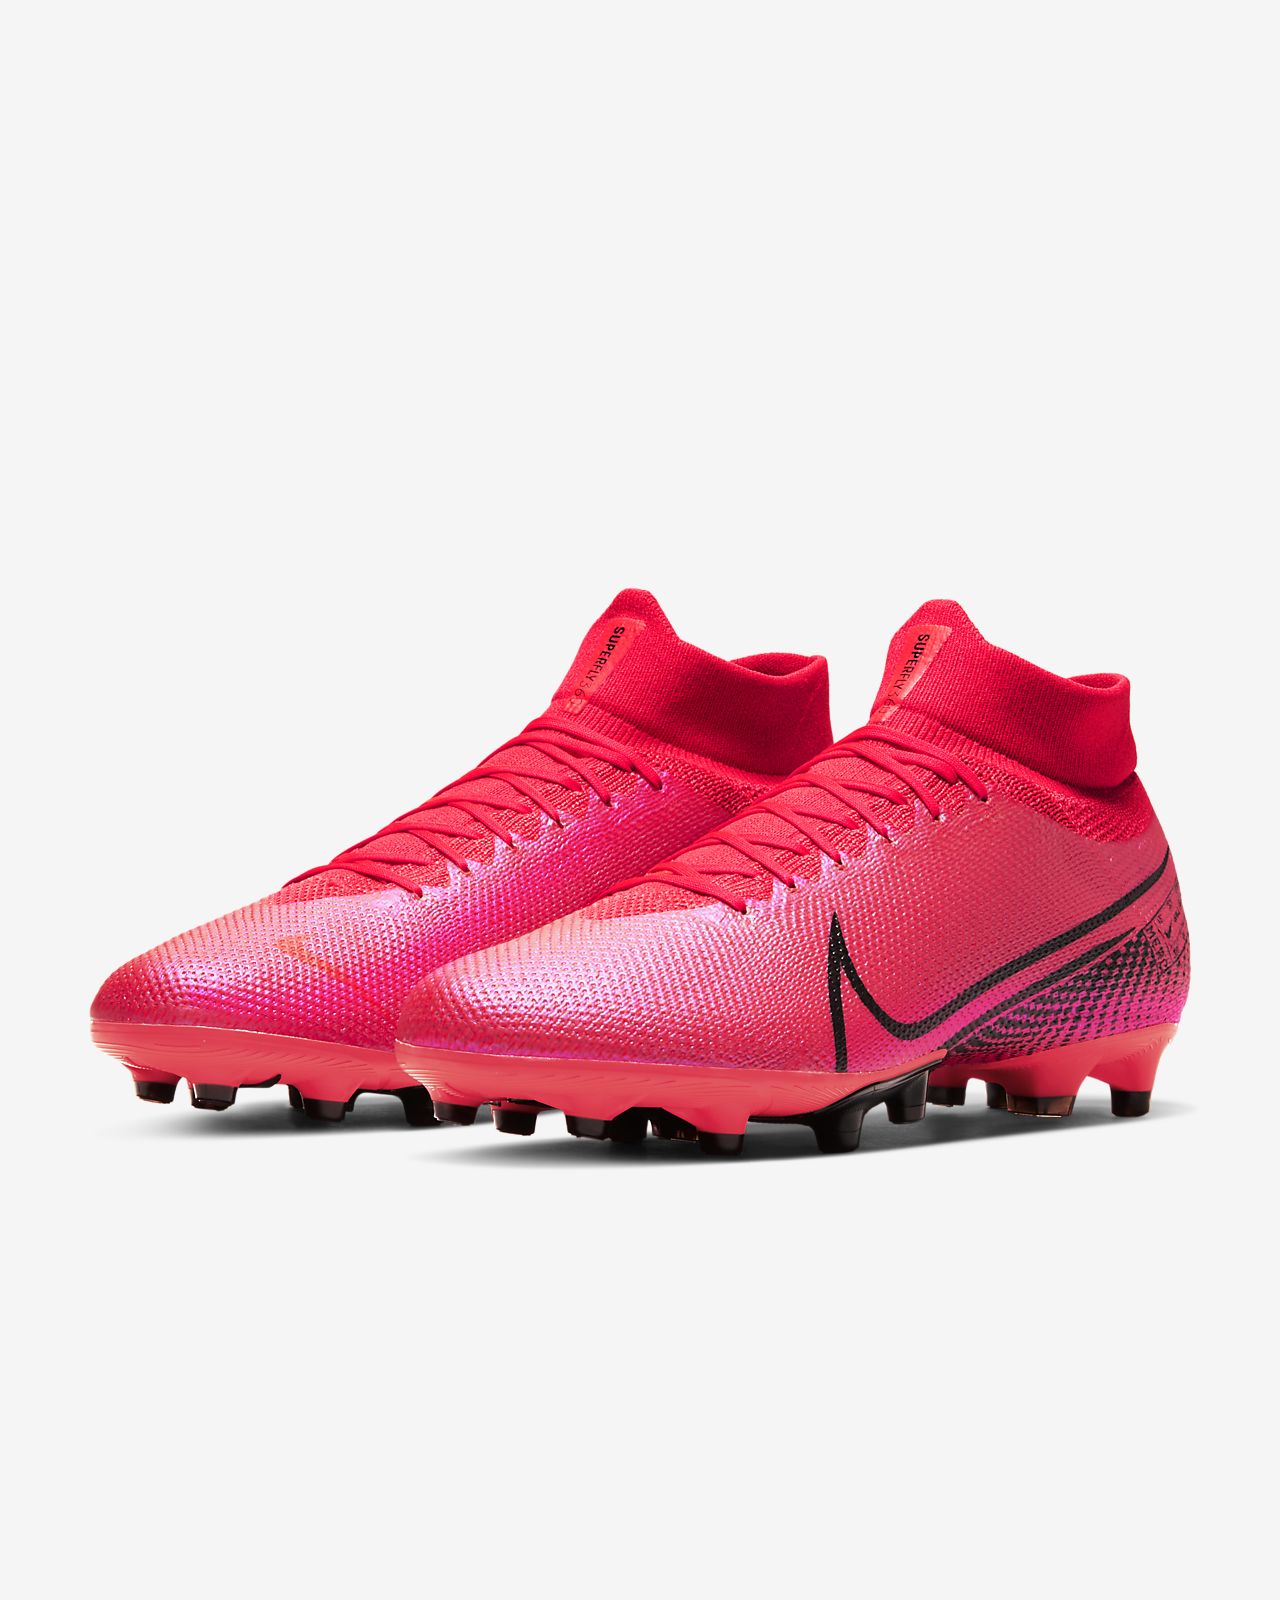 7 Reasons to NOT to Buy Nike Mercurial Superfly VI Pro Firm